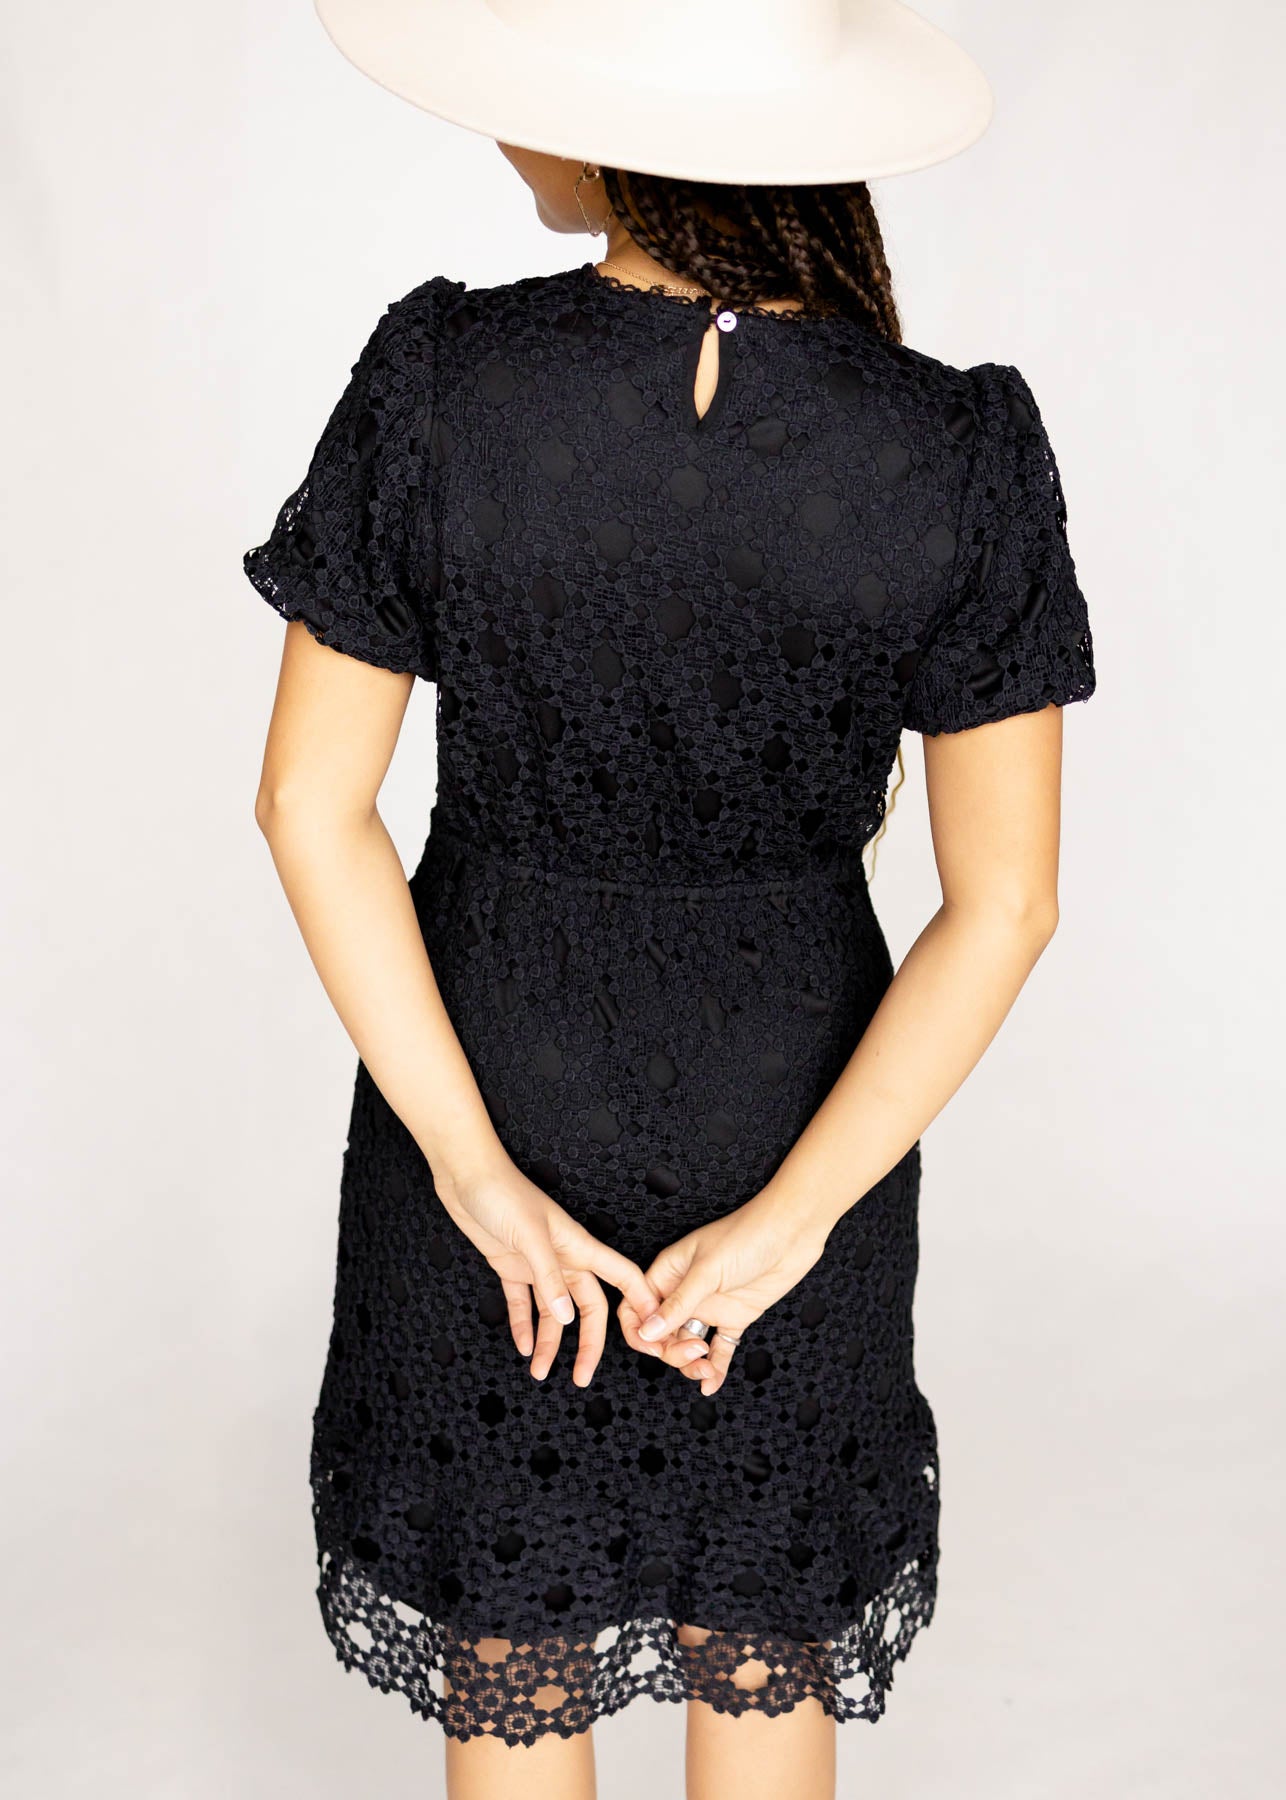 Back view of a black lace dress